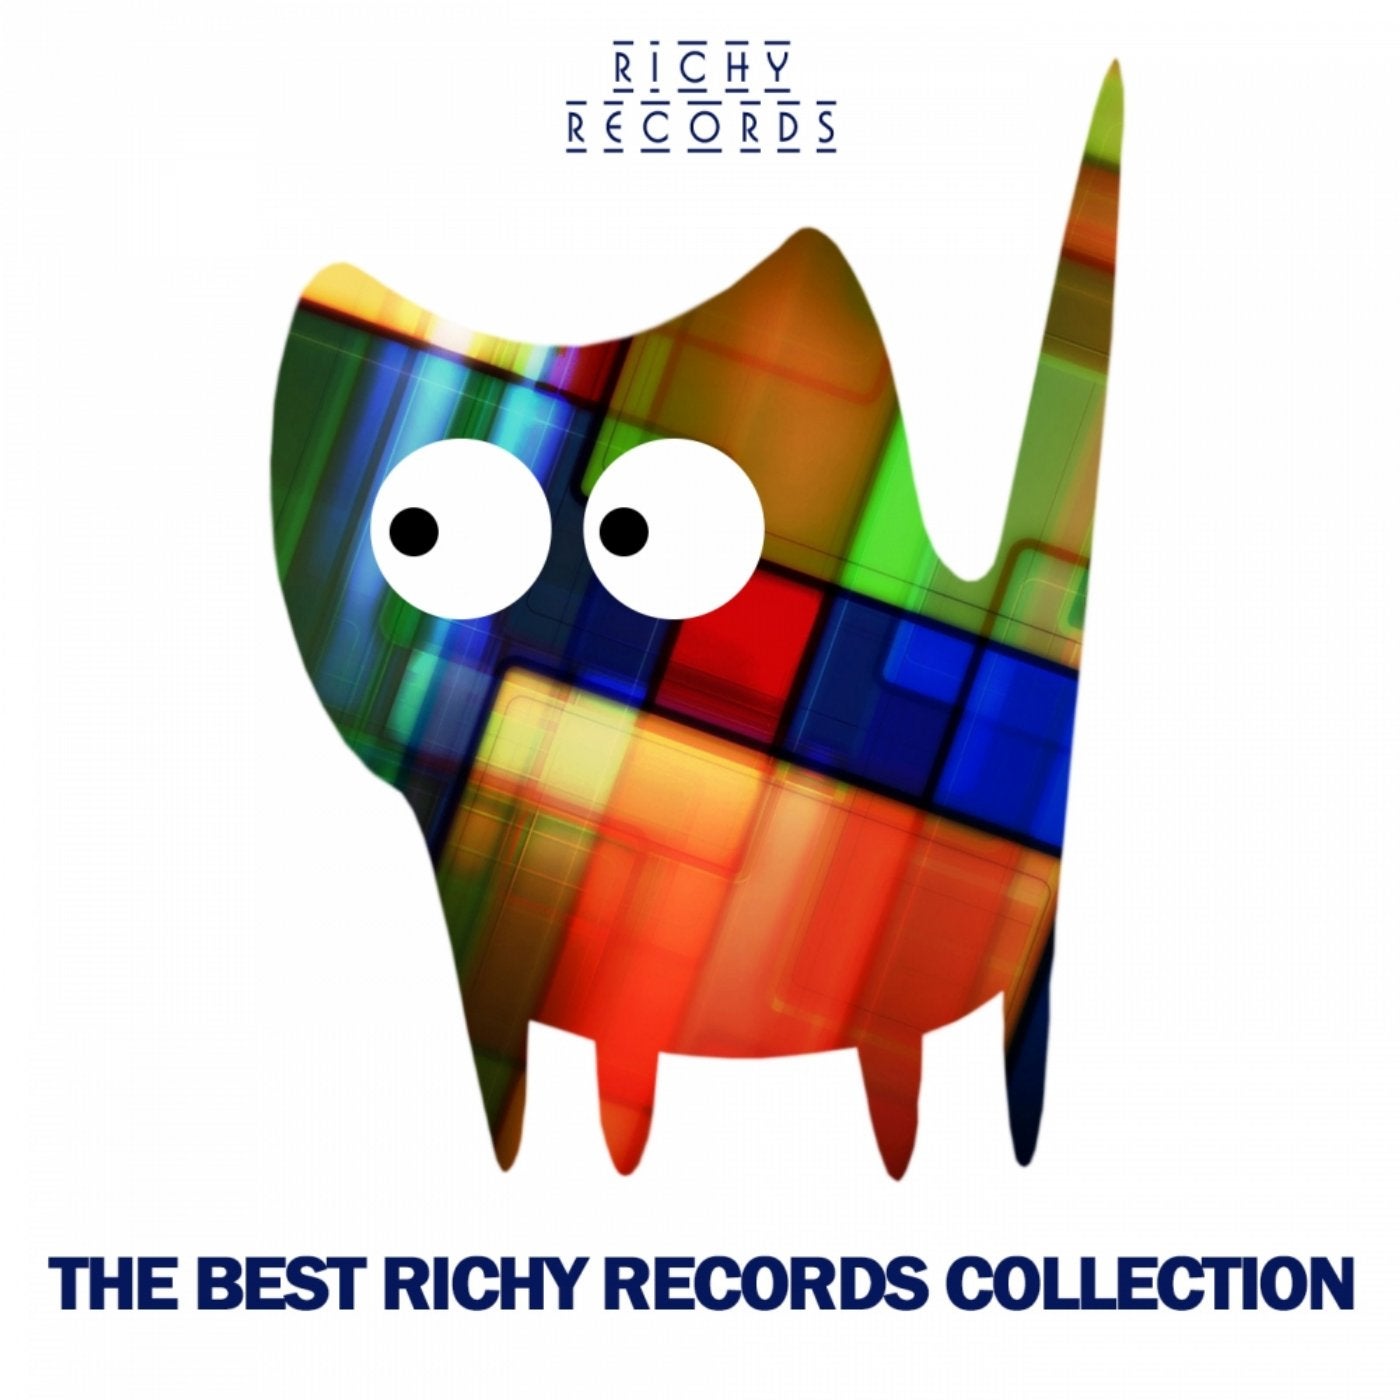 The Best Richy Records Collection